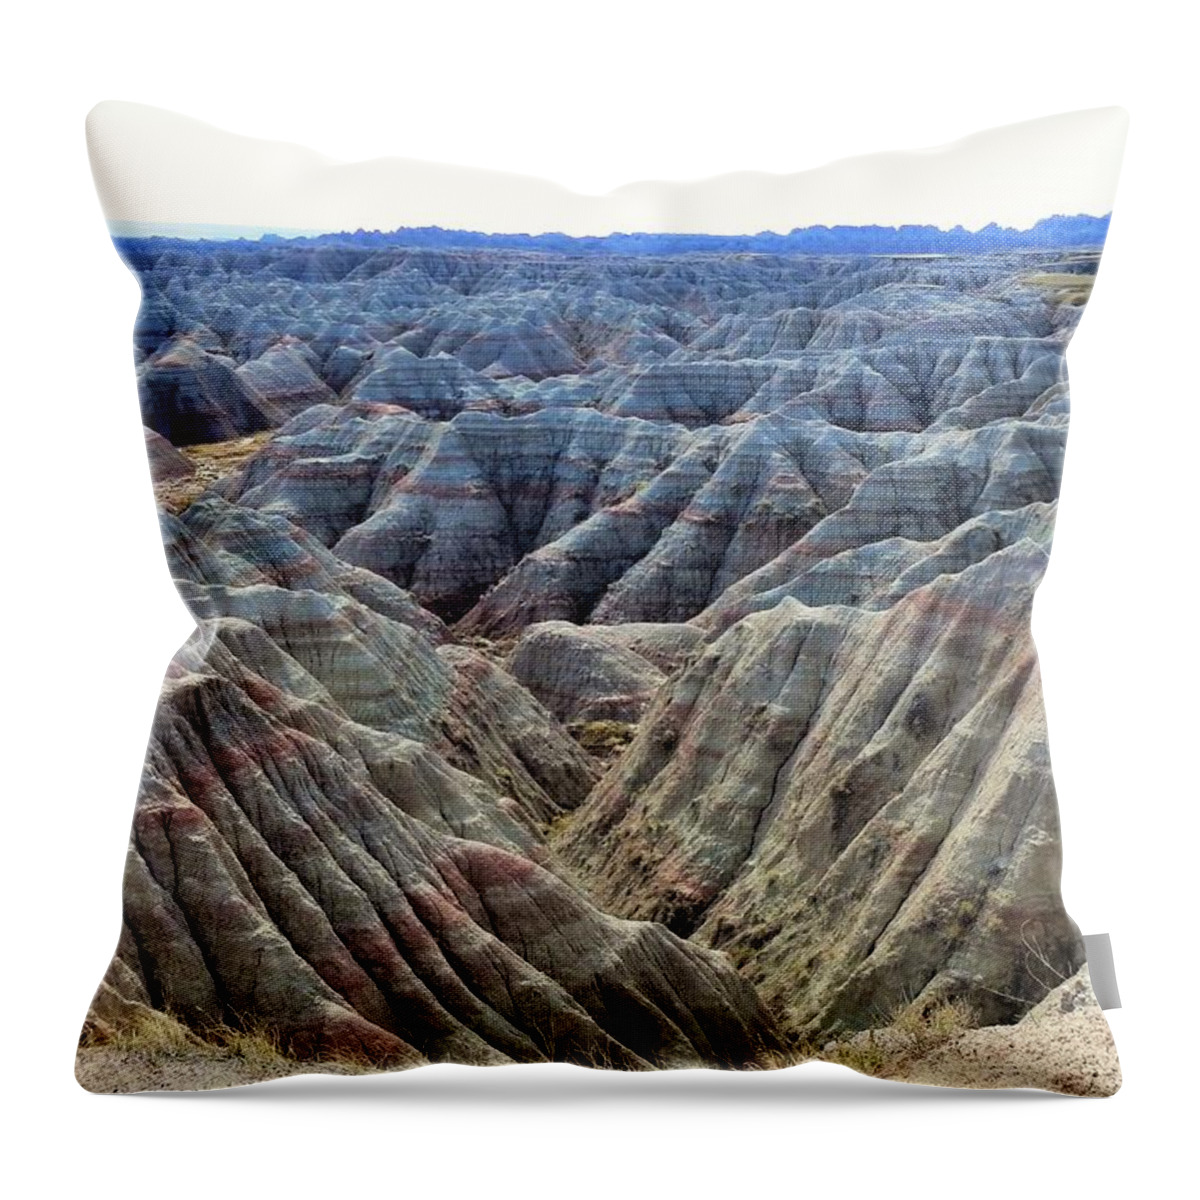 Badlands National Park Throw Pillow featuring the photograph Blue Symphony by Rosanne Licciardi